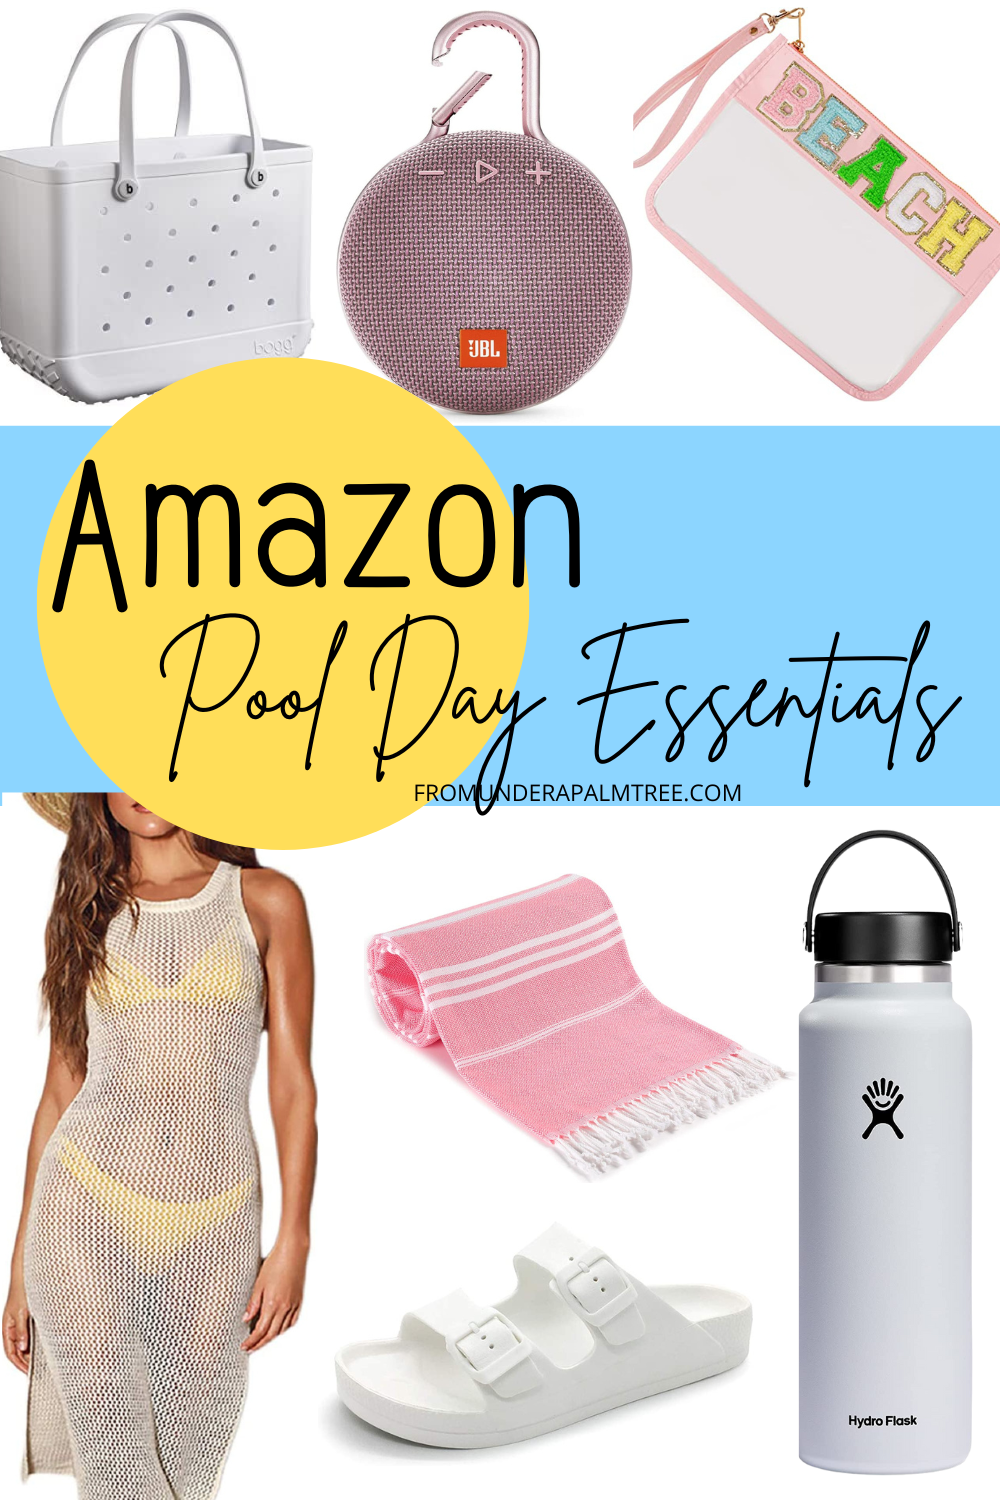 Amazon Essentials | Amazon Pool Day Essentials | Amazon Pool Day Must Haves | pool day | pool day essentials | pool day must haves | pool bag | best pool bag | beach bag | best beach bag | bogg bag | pool day items | amazon must haves | summer must haves | summer pool items from amazon | Amazon summer essentials | best swimsuit cover ups | beach cover up | best portable charger | portable phone charger for the pool | portable phone charger for the beach | best portable phone charger |